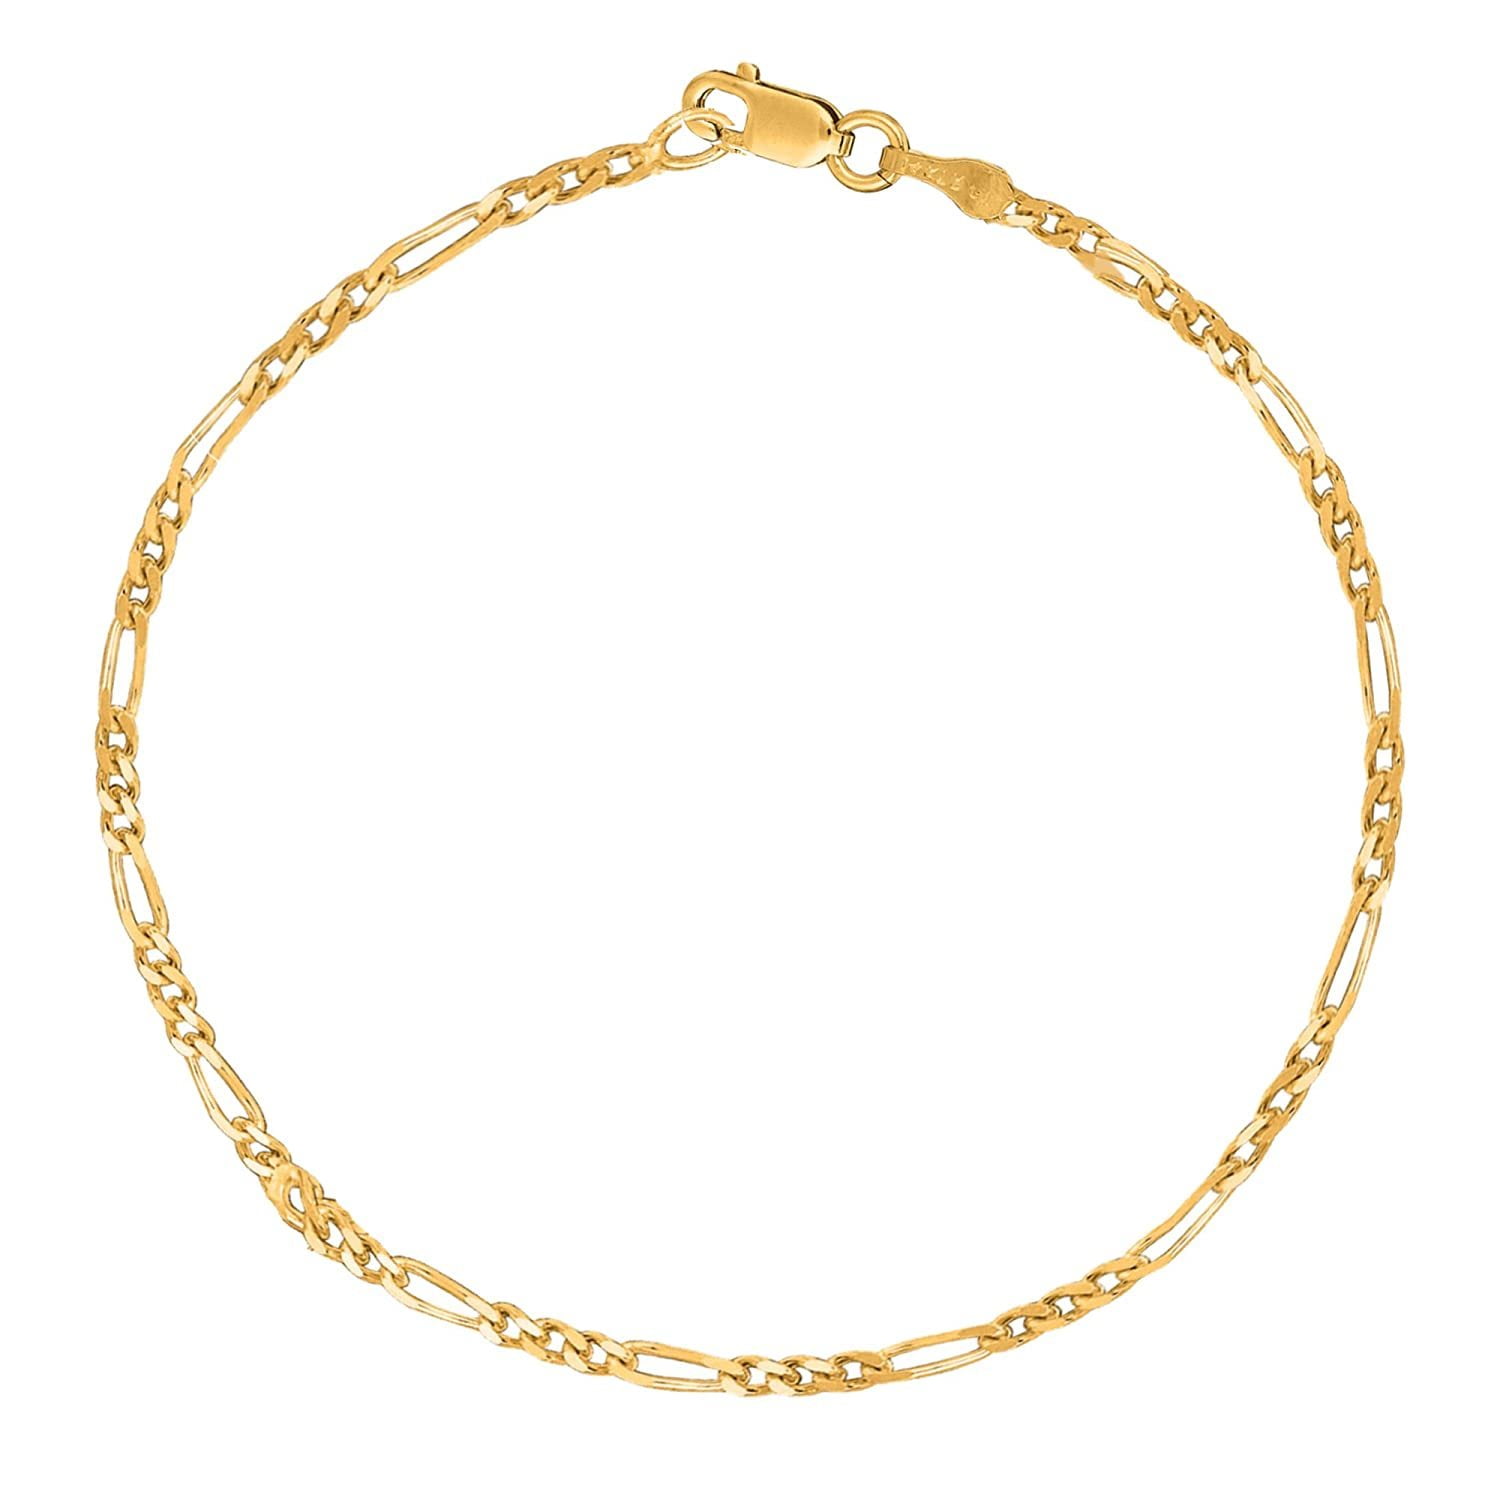 Italian 14kt Yellow Gold Hollow Faceted Bangle Bracelet 7" 3.65mm 3.8 grams